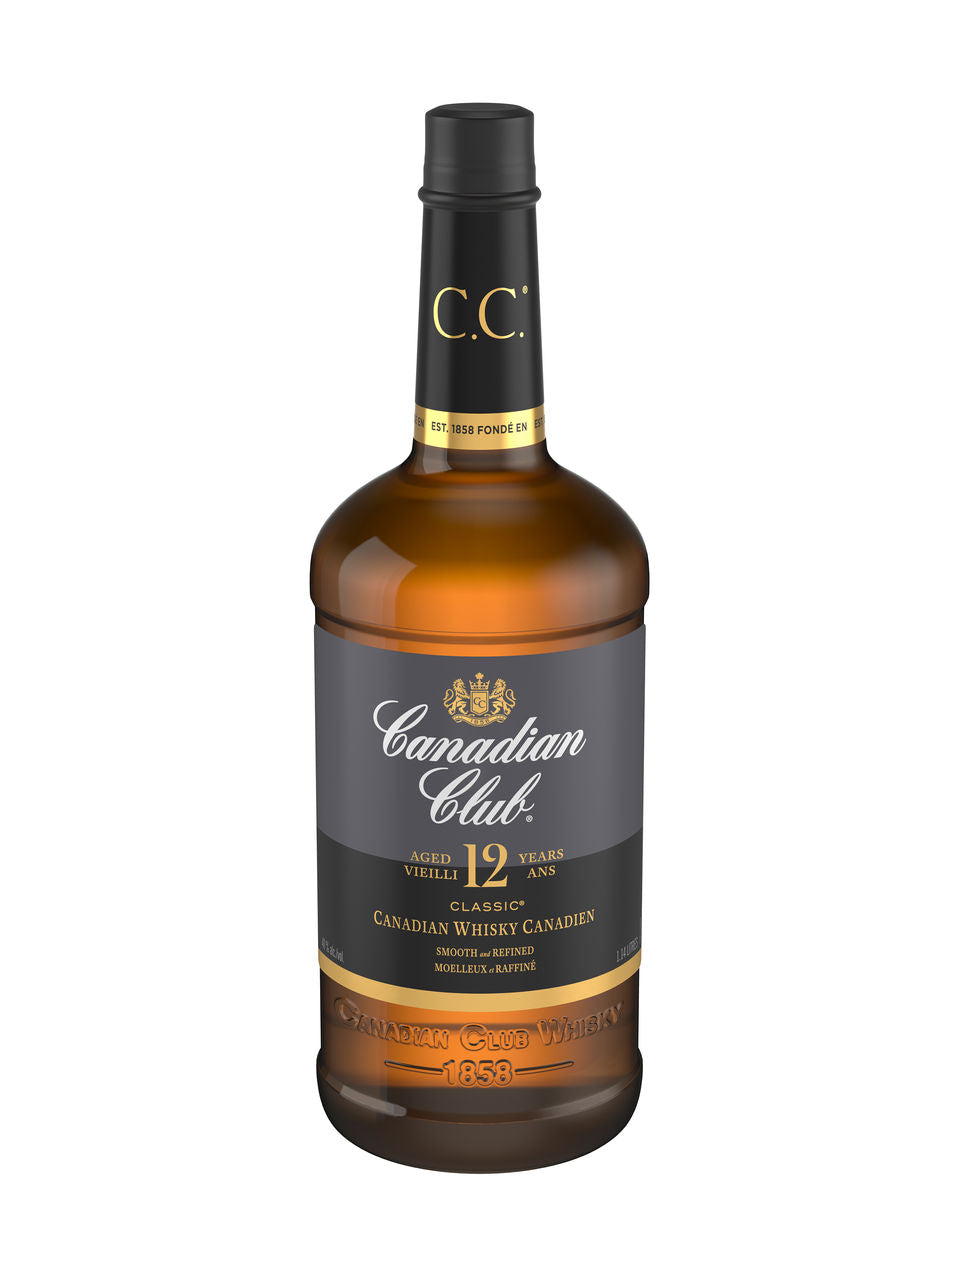 Canadian Club Classic 12 Year Old 1140 mL bottle